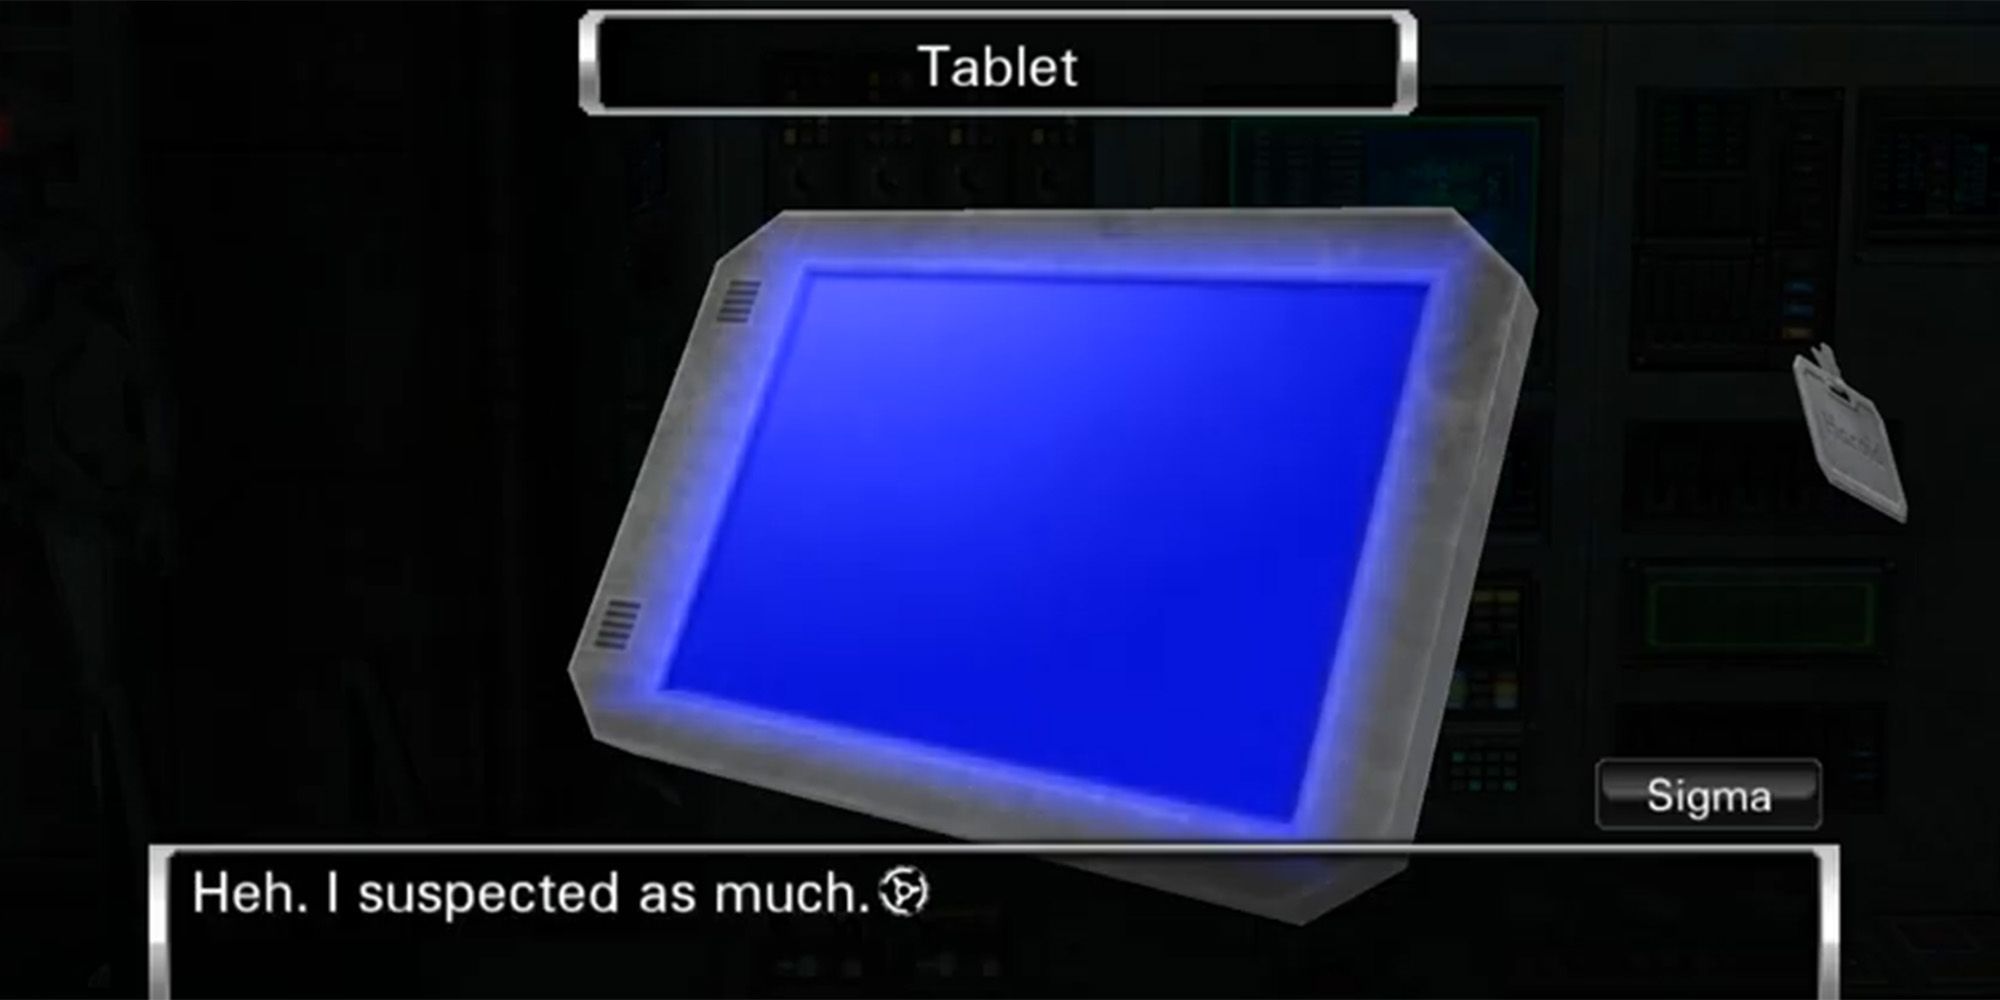 tablet lighting up blue to get the gold file